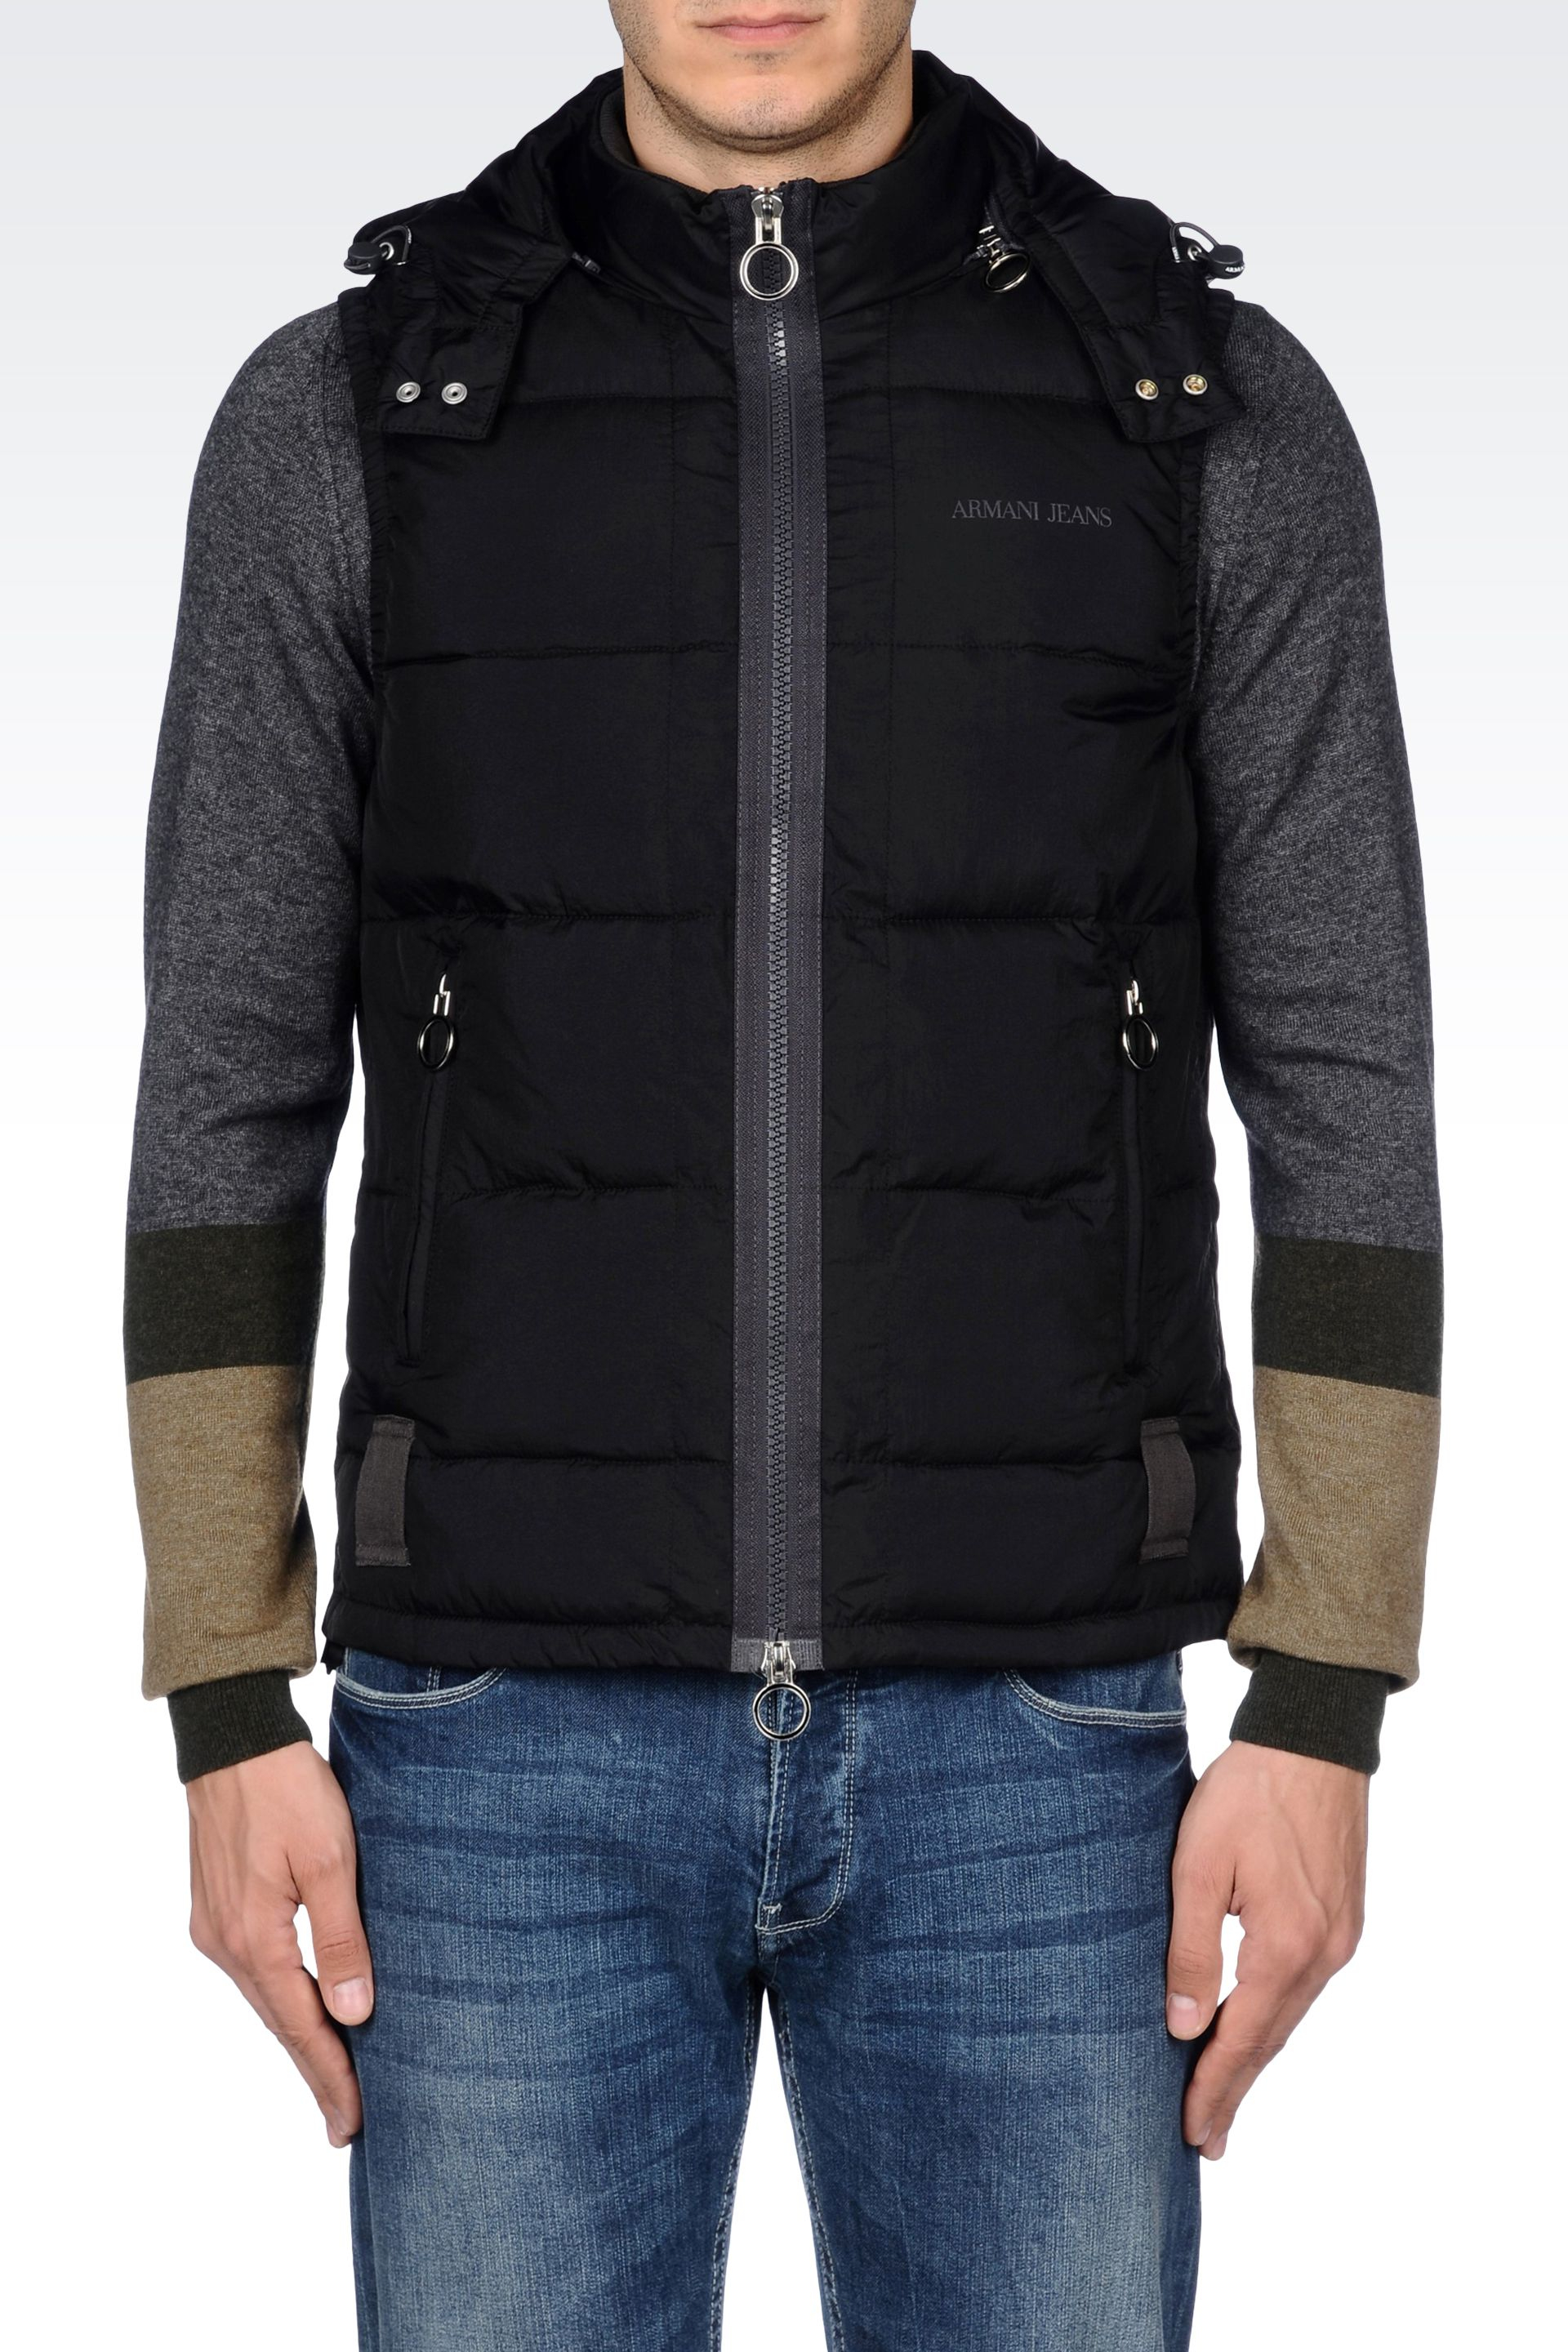 Lyst - Armani Jeans Hooded Gilet In Technical Fabric in Black for Men